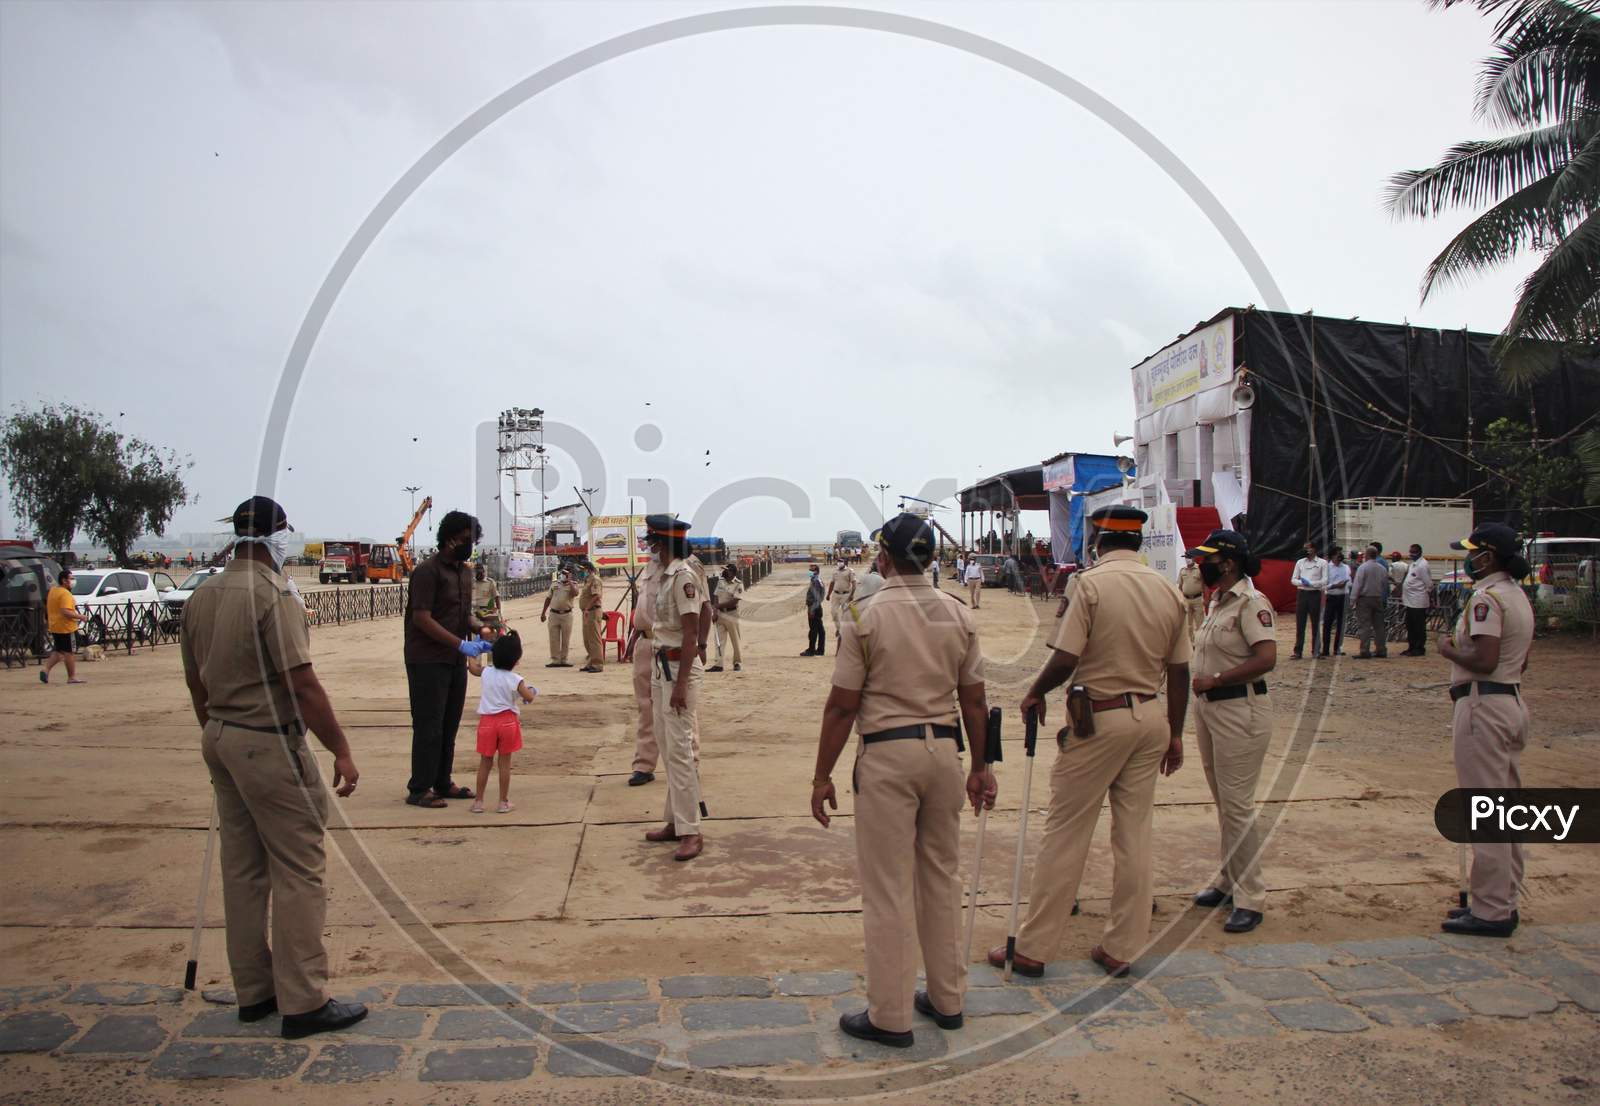 Police personnel stand guard outside Girgoan Chowpatty, during the Ganesh Chaturthi festival in Mumbai, India on August 23, 2020.